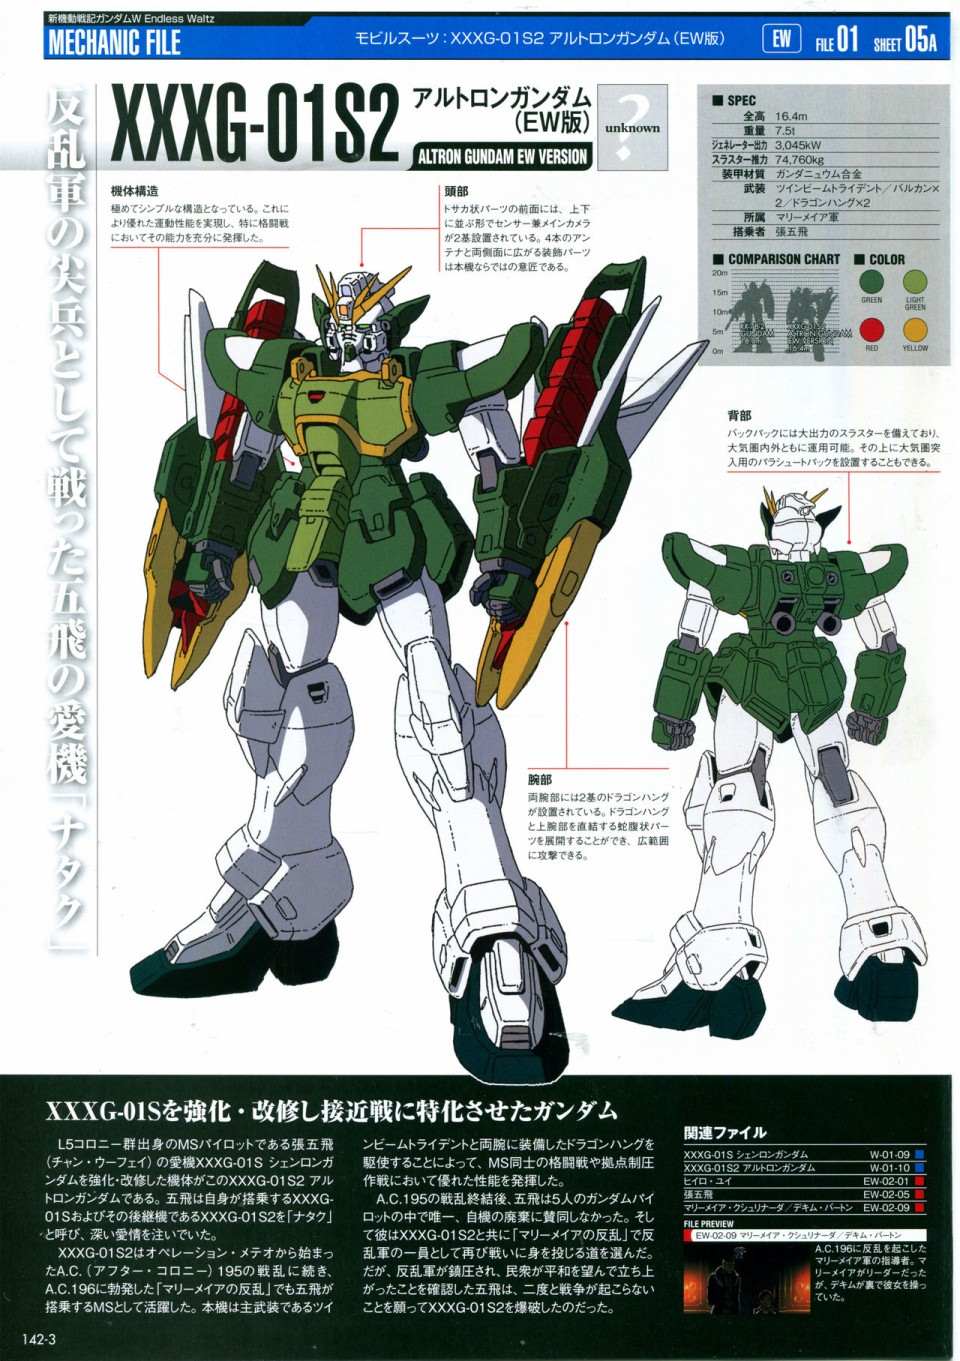 The Official Gundam Perfect File  - 第142話 - 1